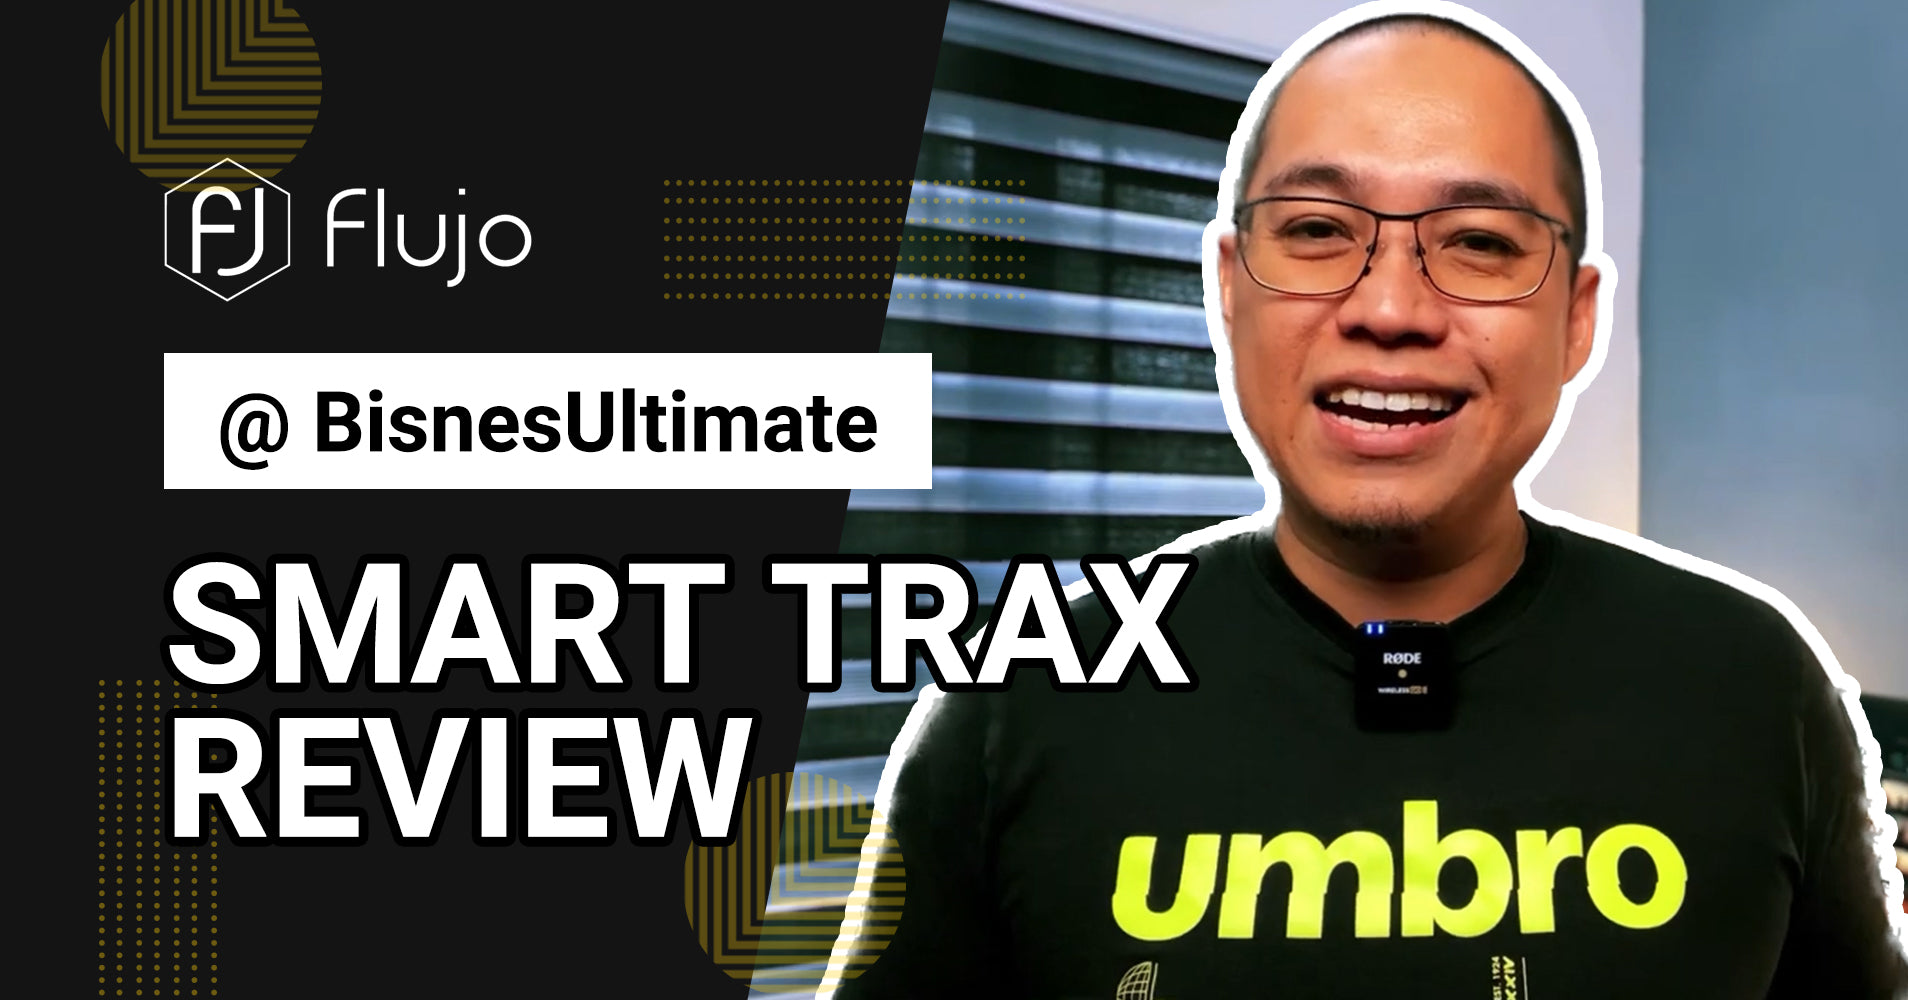 BisnesUltimate reviews Flujo's Smart Trax, sharing insights on its innovative features and user benefits.